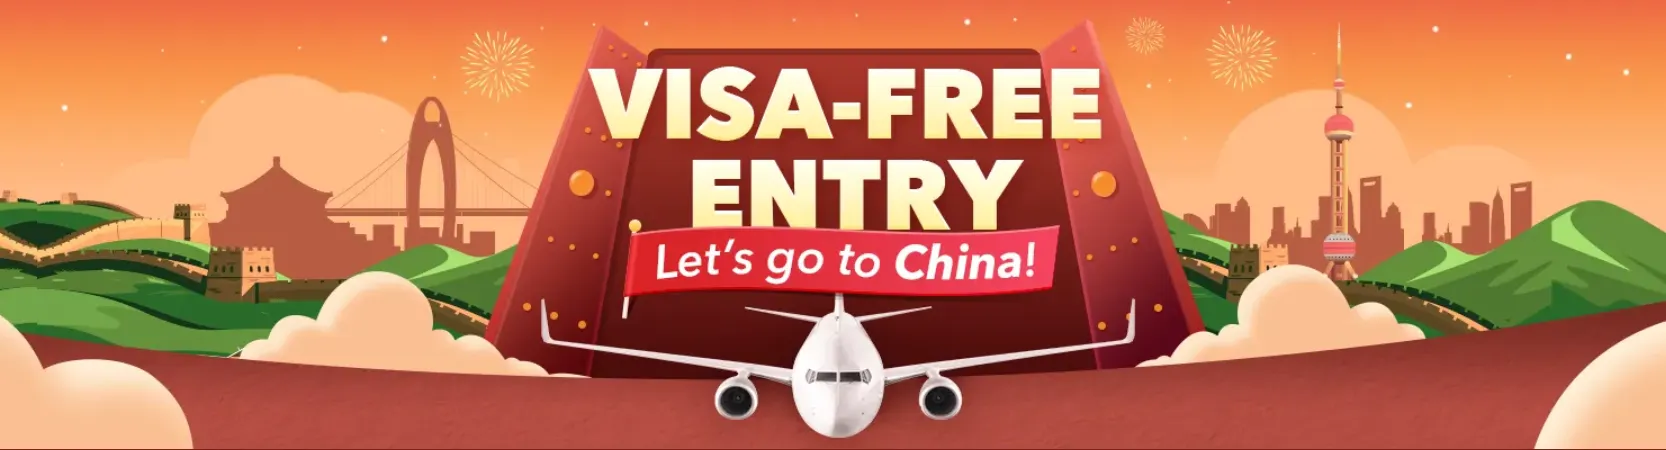 Trip.com Promo Code Malaysia: Fly to China with Visa-Free Entry